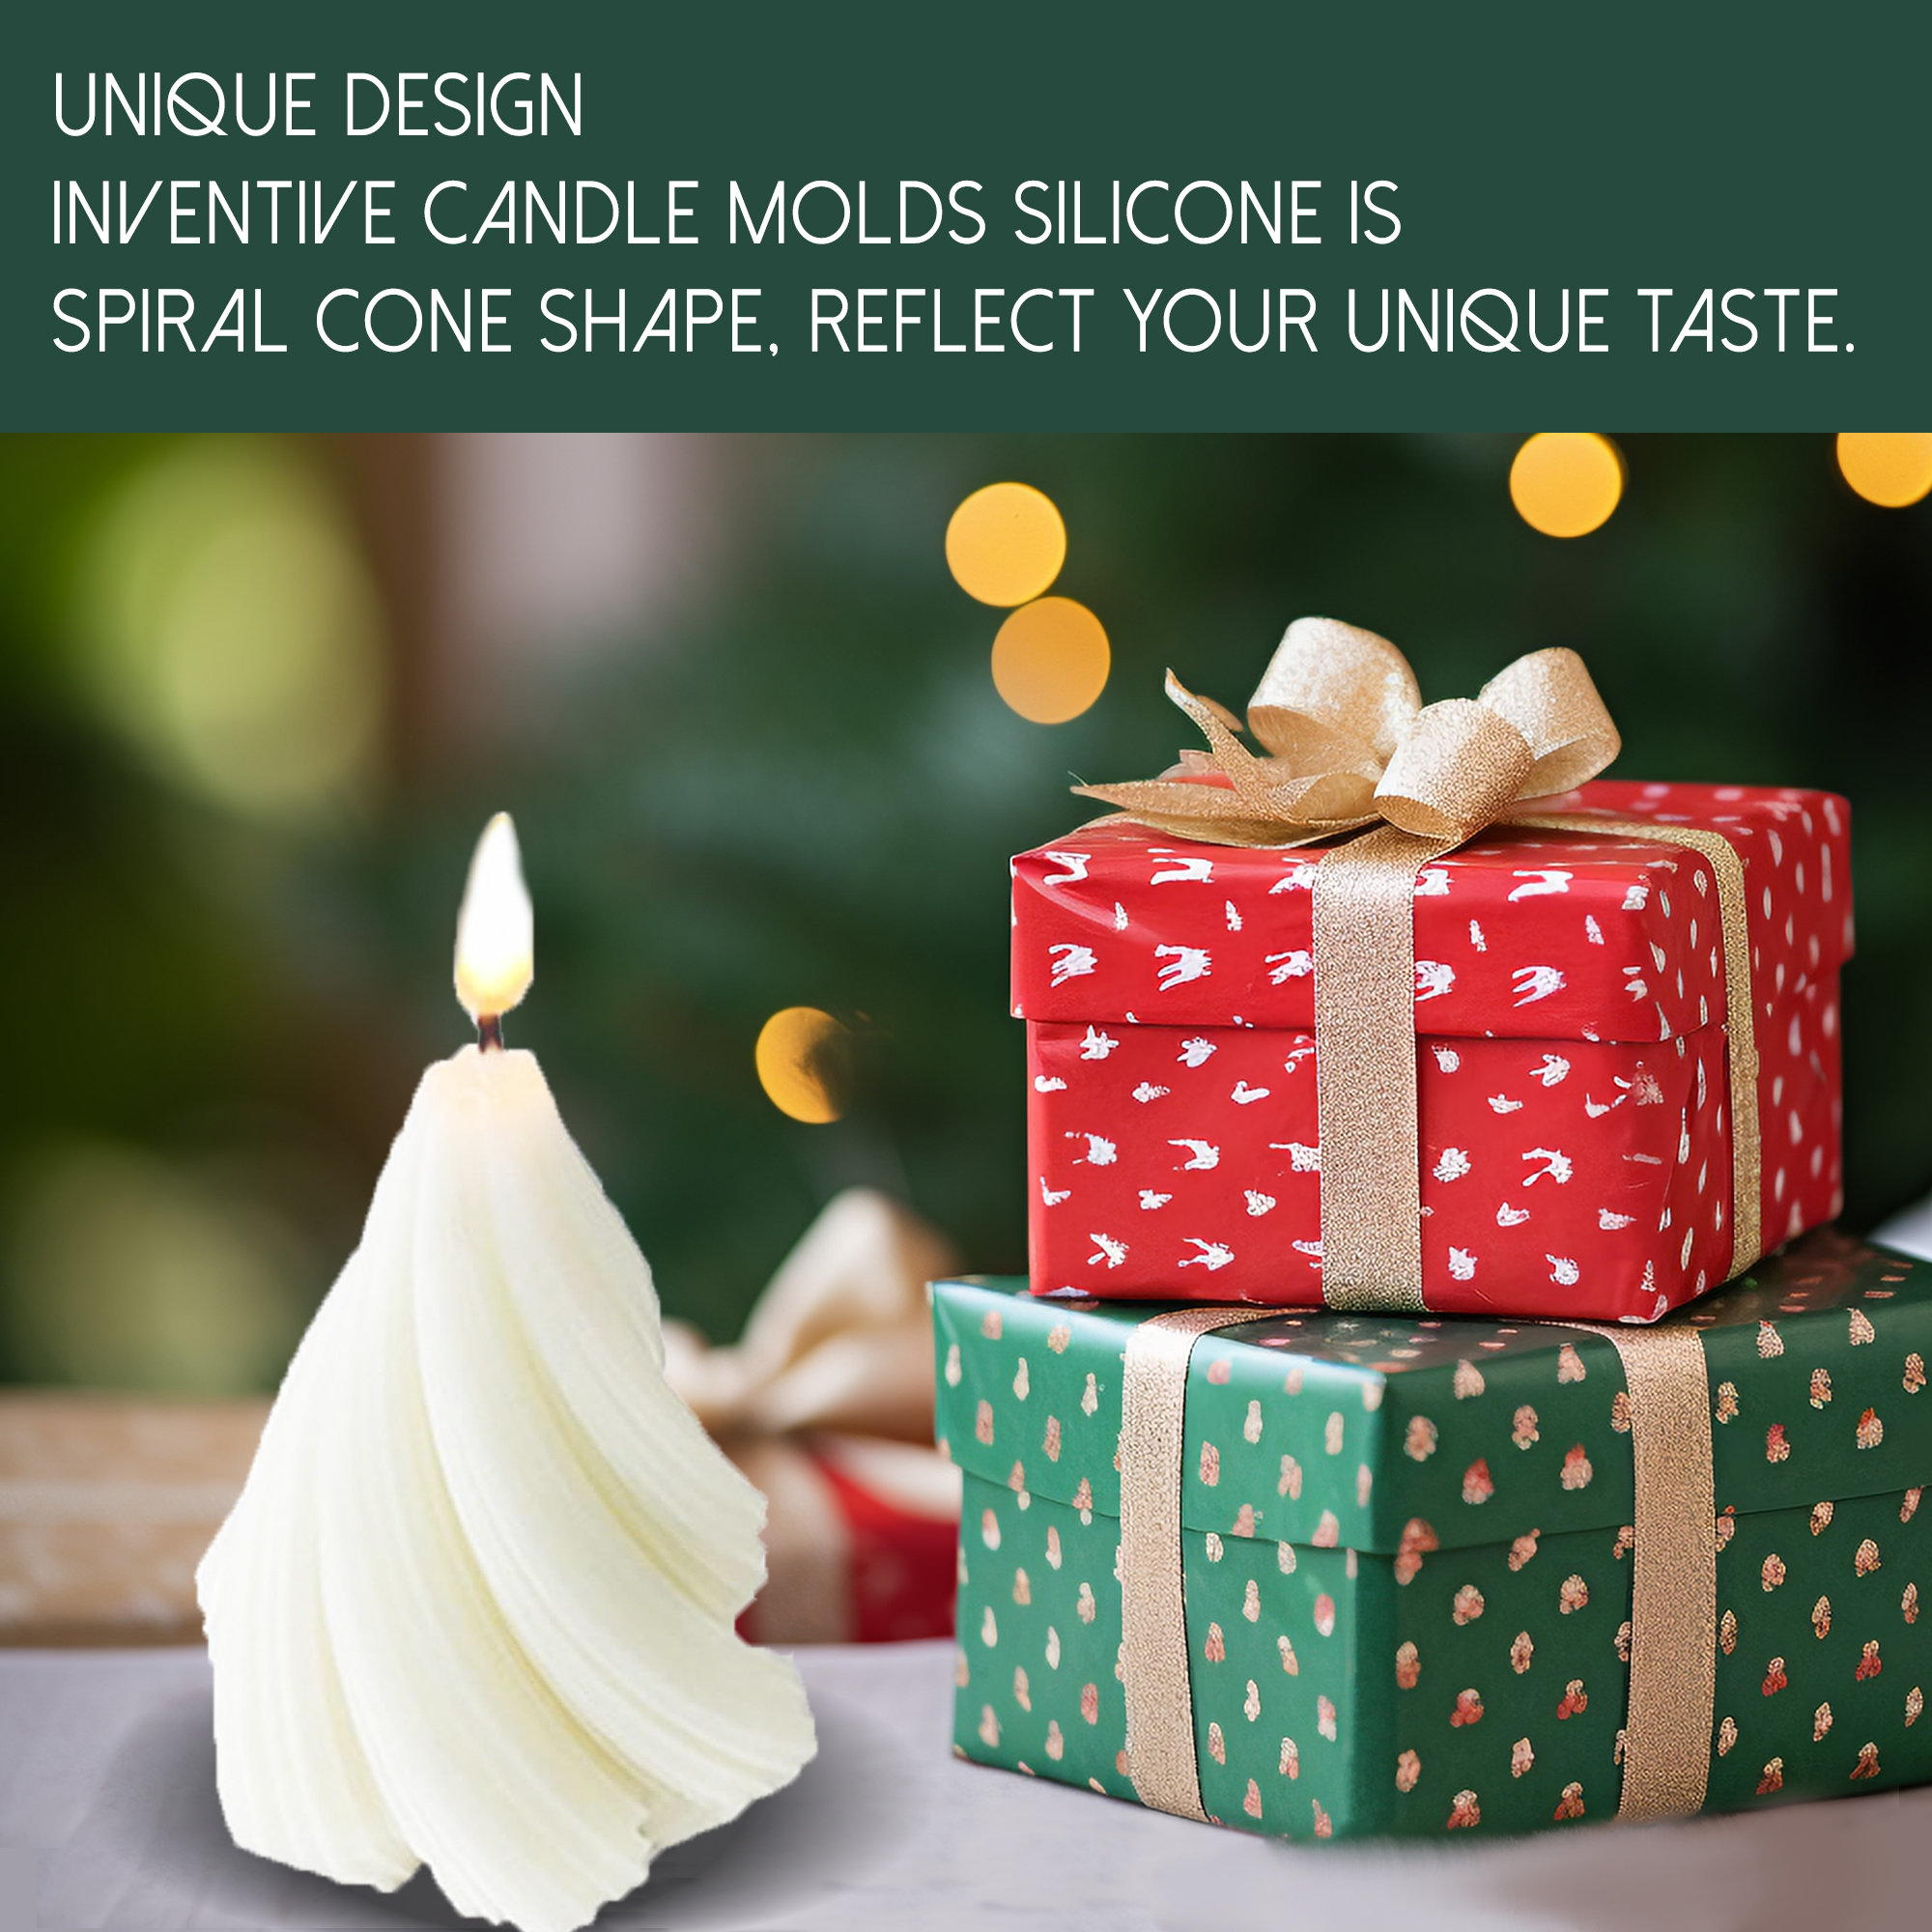 VUTEHO 3D Spiral Cone Shape Candle Molds Silicone, Molds for